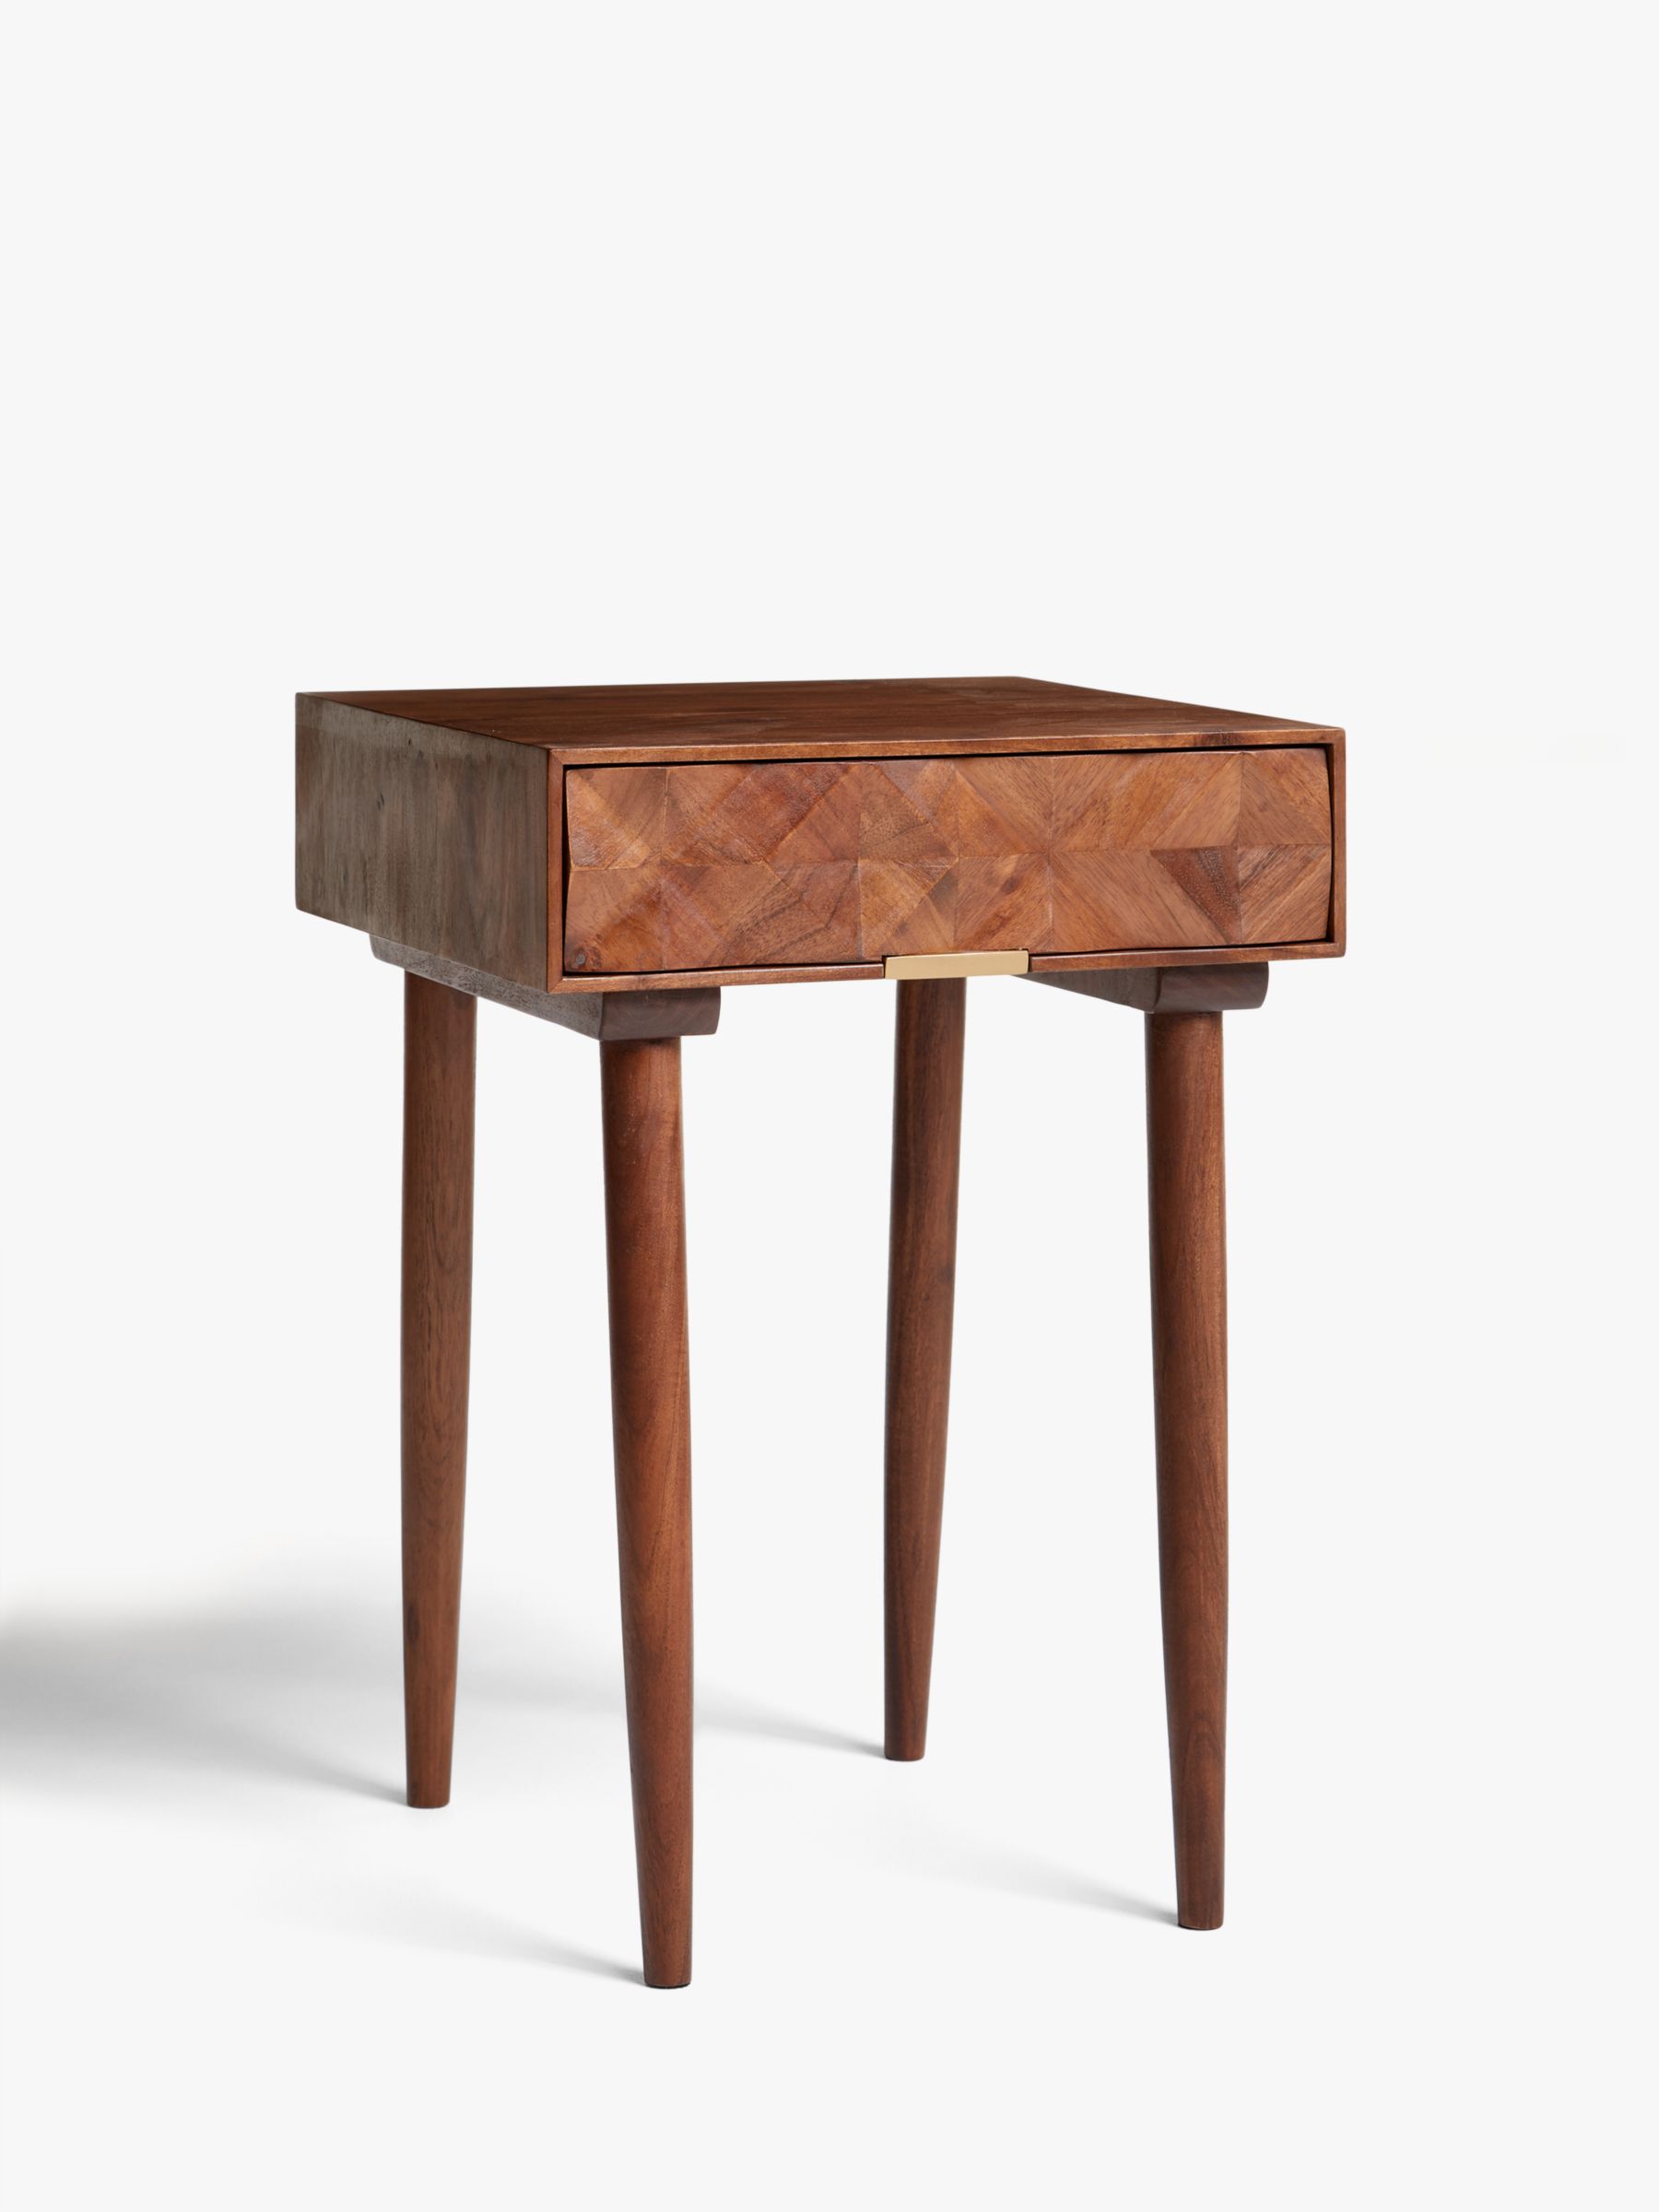 Photo of John lewis + swoon franklin side table brown